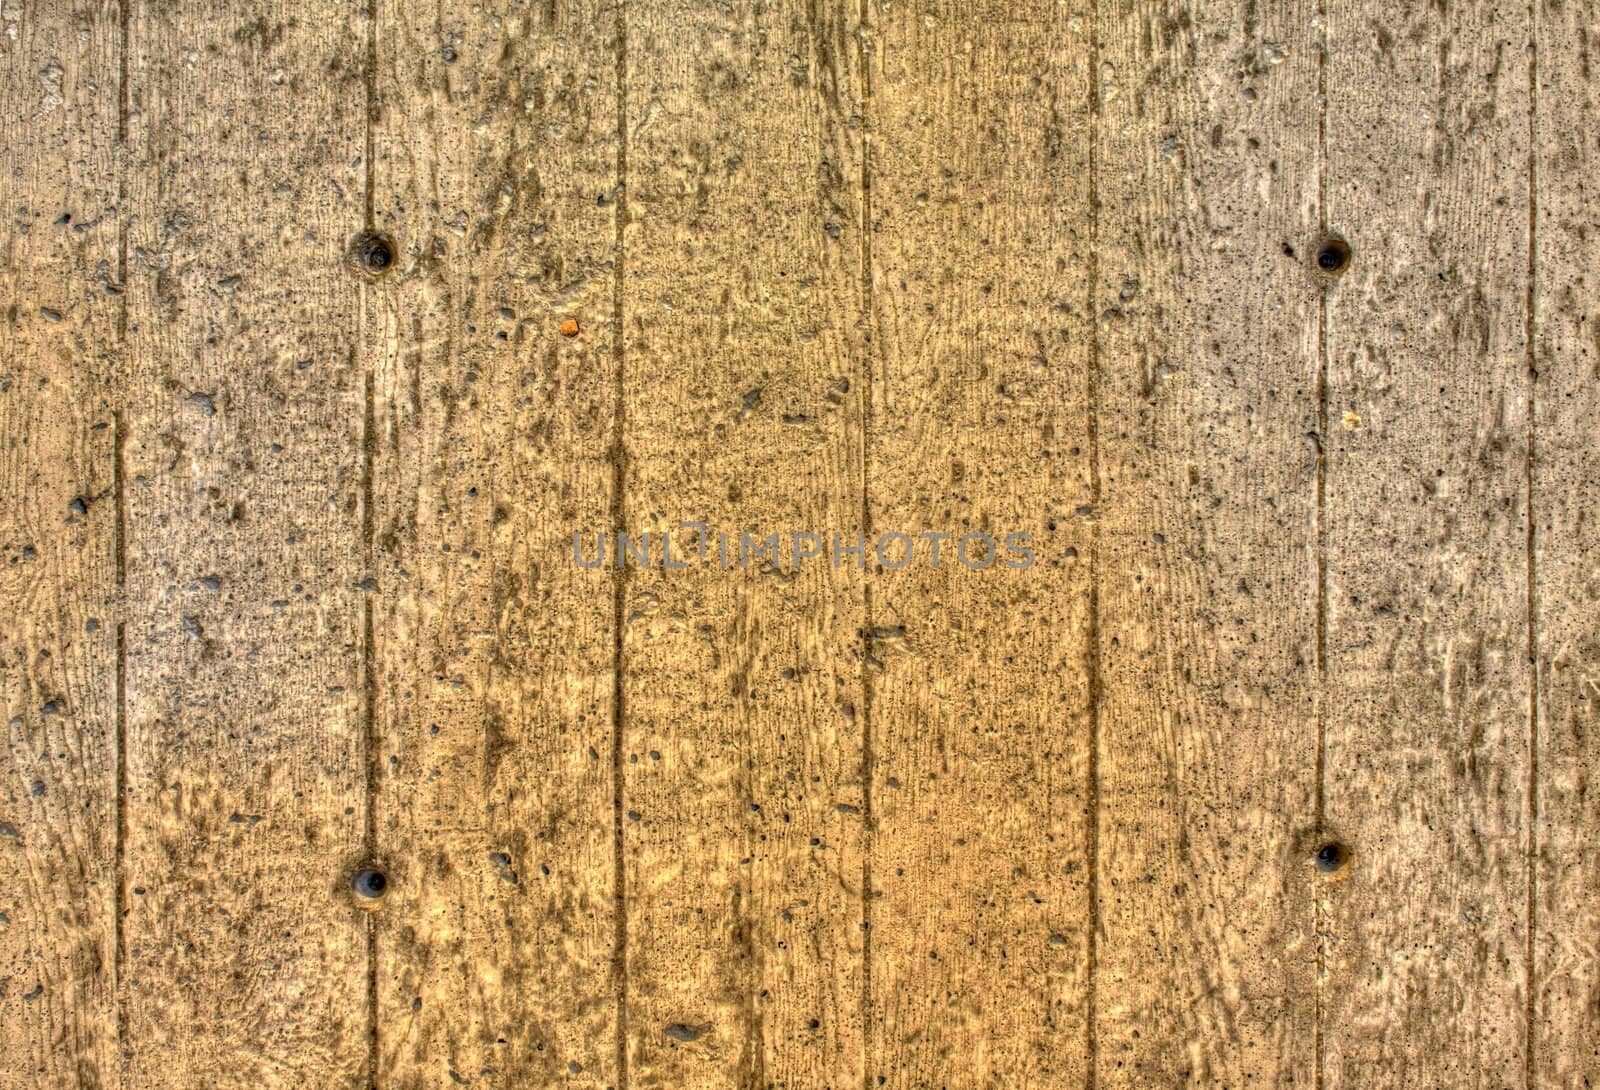 A wood panel background, shot in HDR